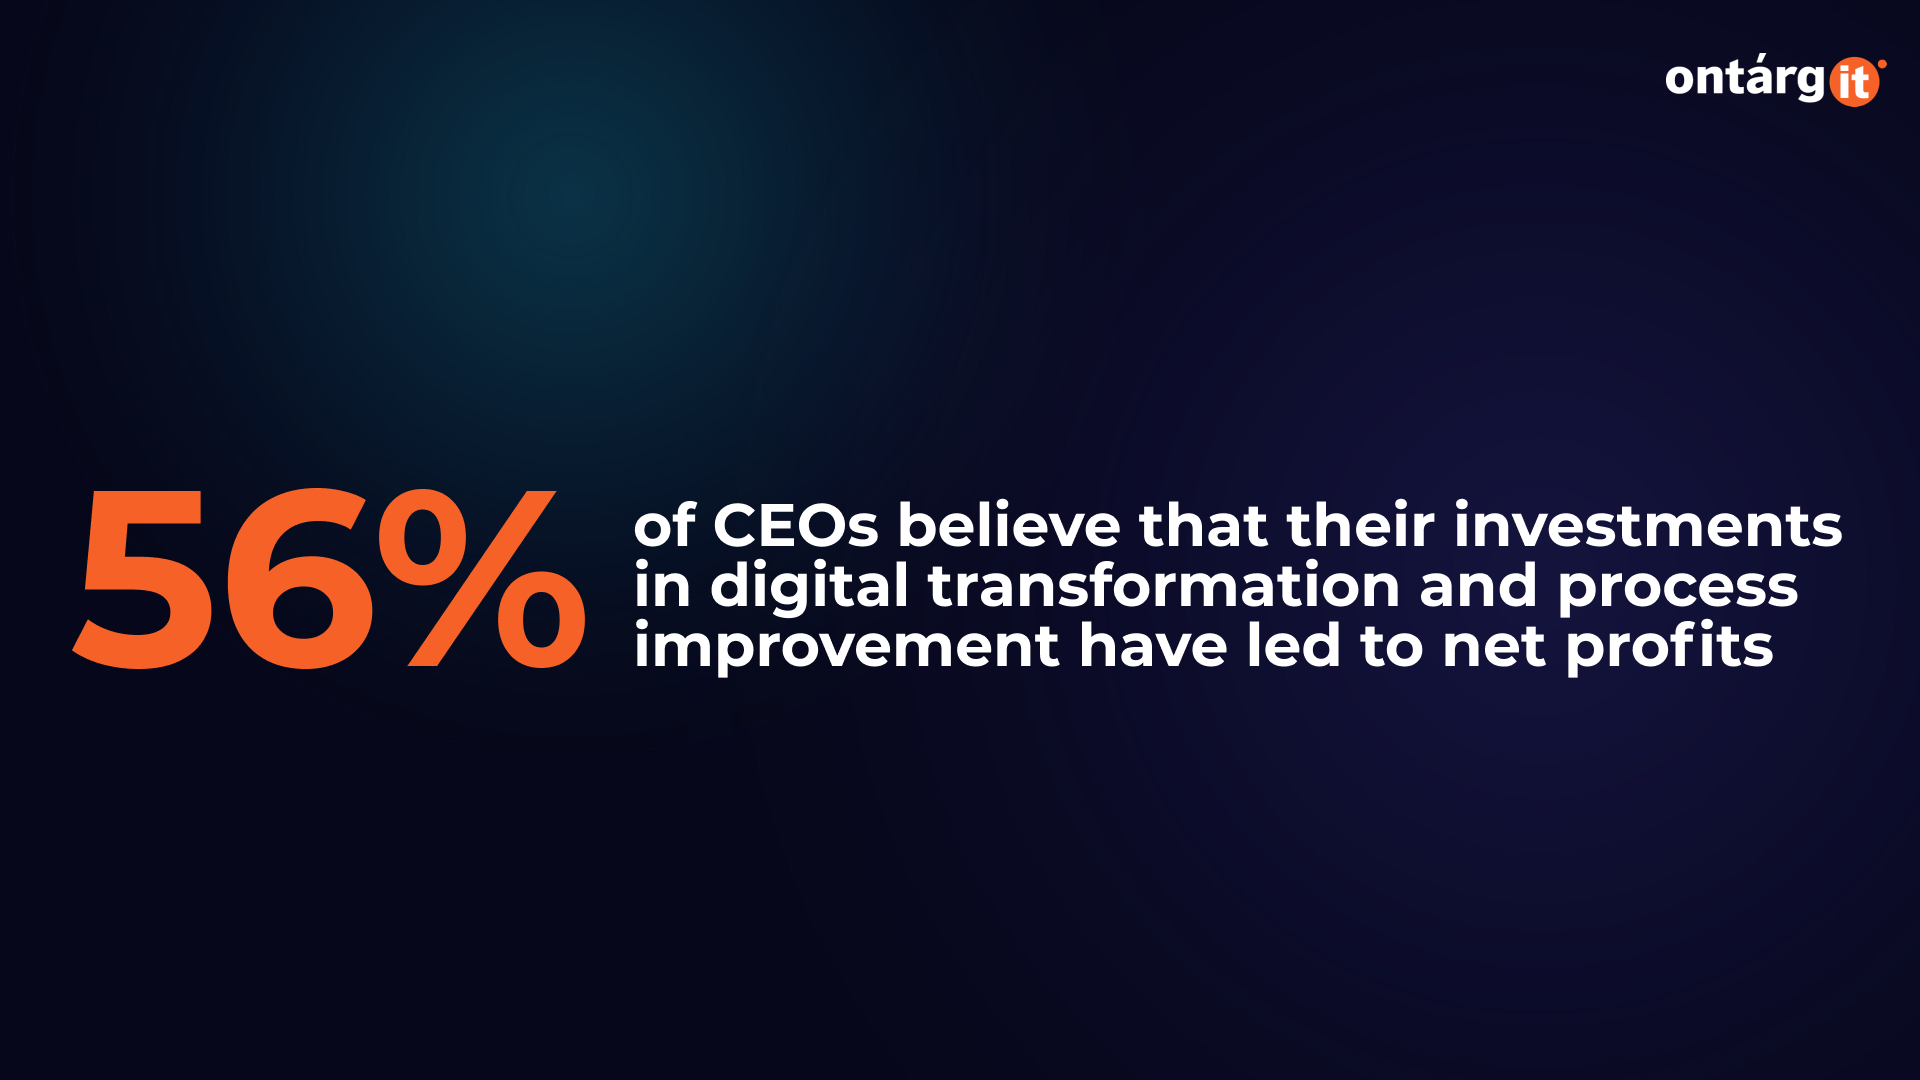 54% of CEOs believe that their investments in digital transformation and process improvement have led to net profits